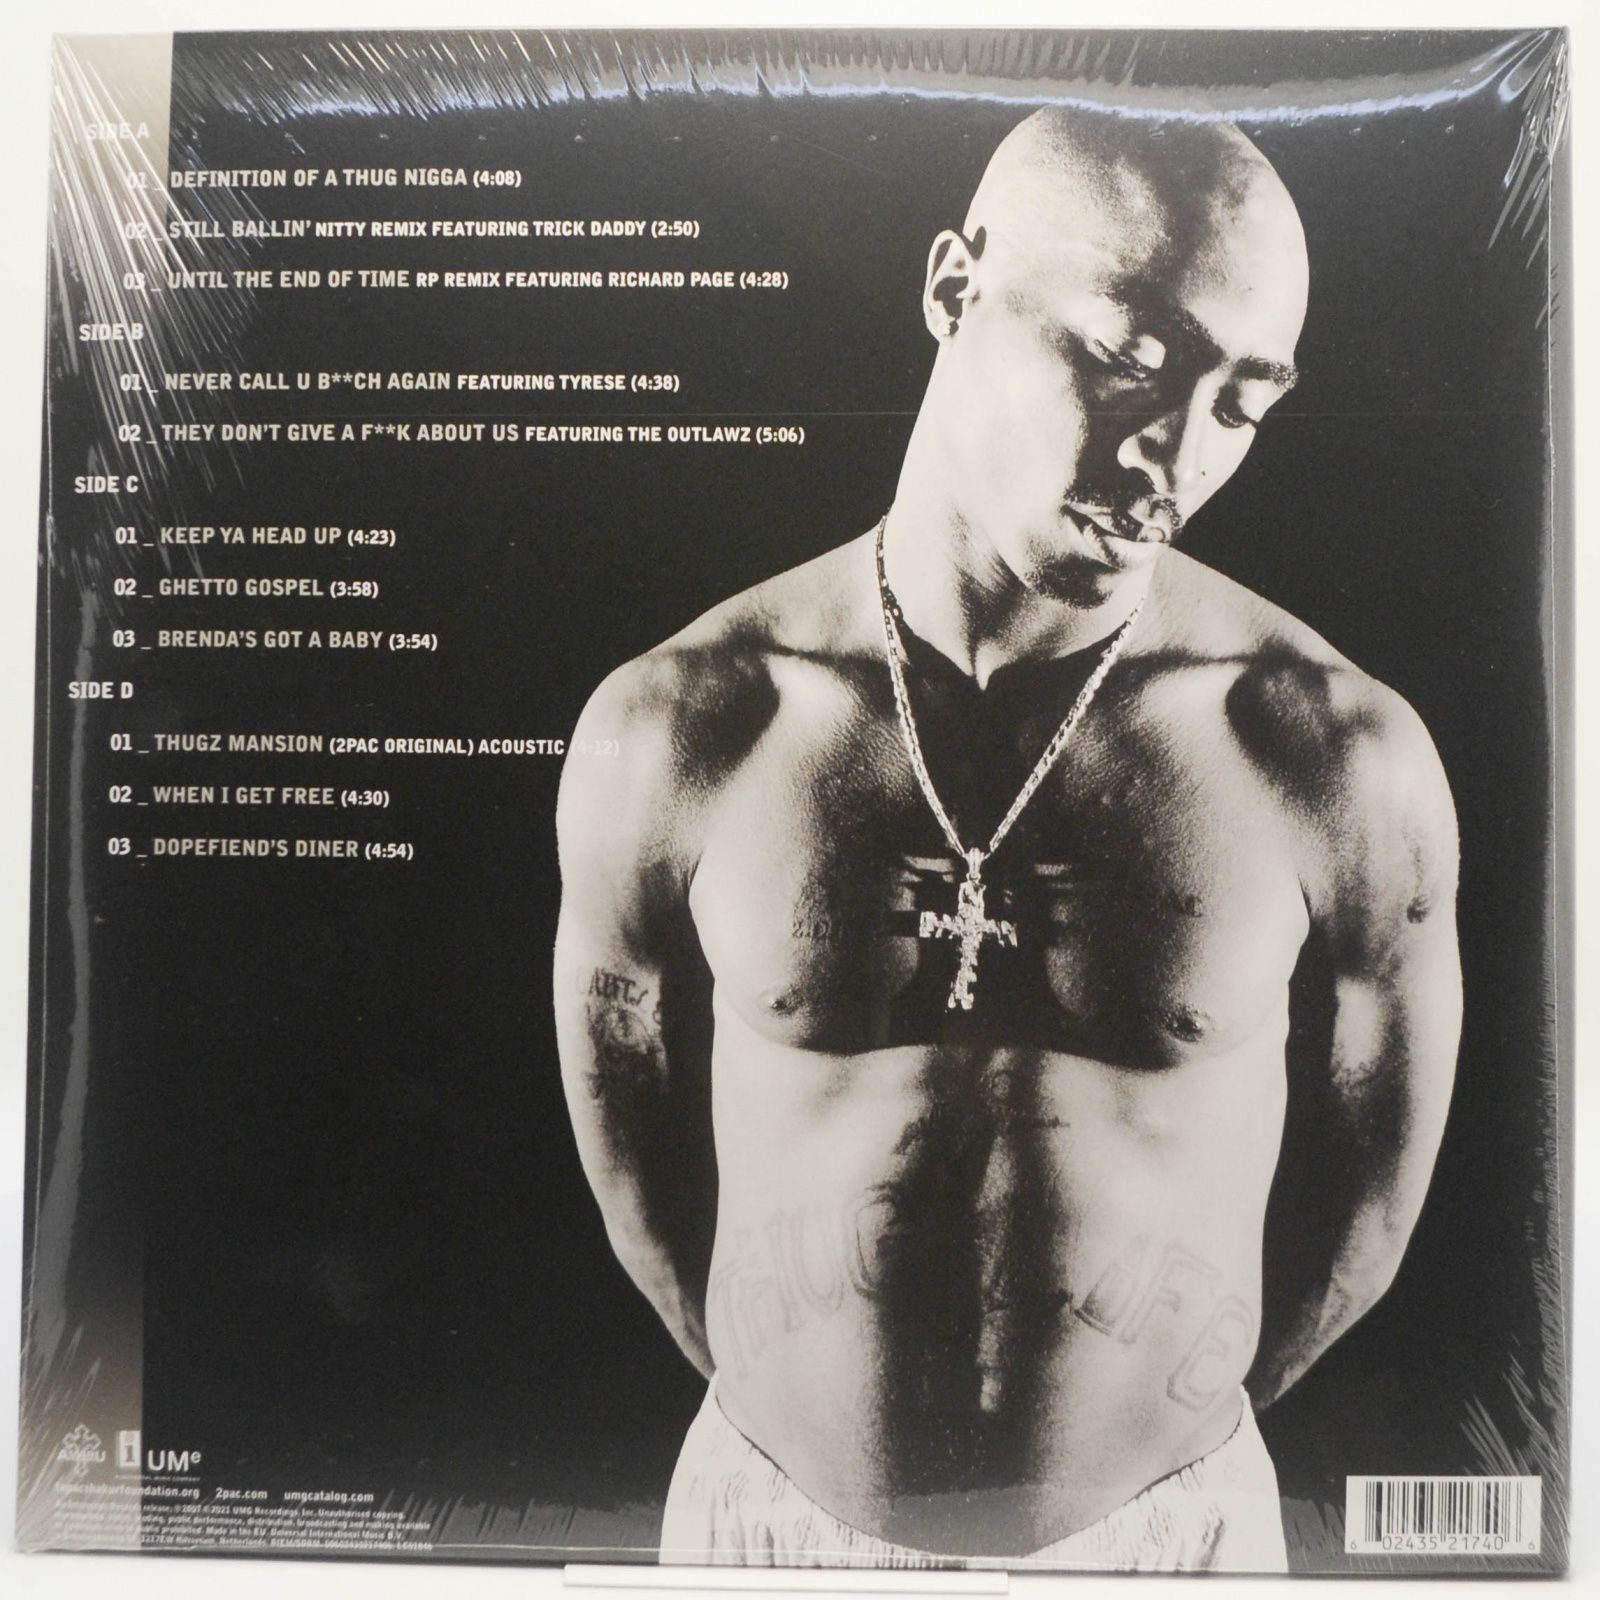 2Pac — The Best Of 2Pac - Part 2: Life (2LP), 2007